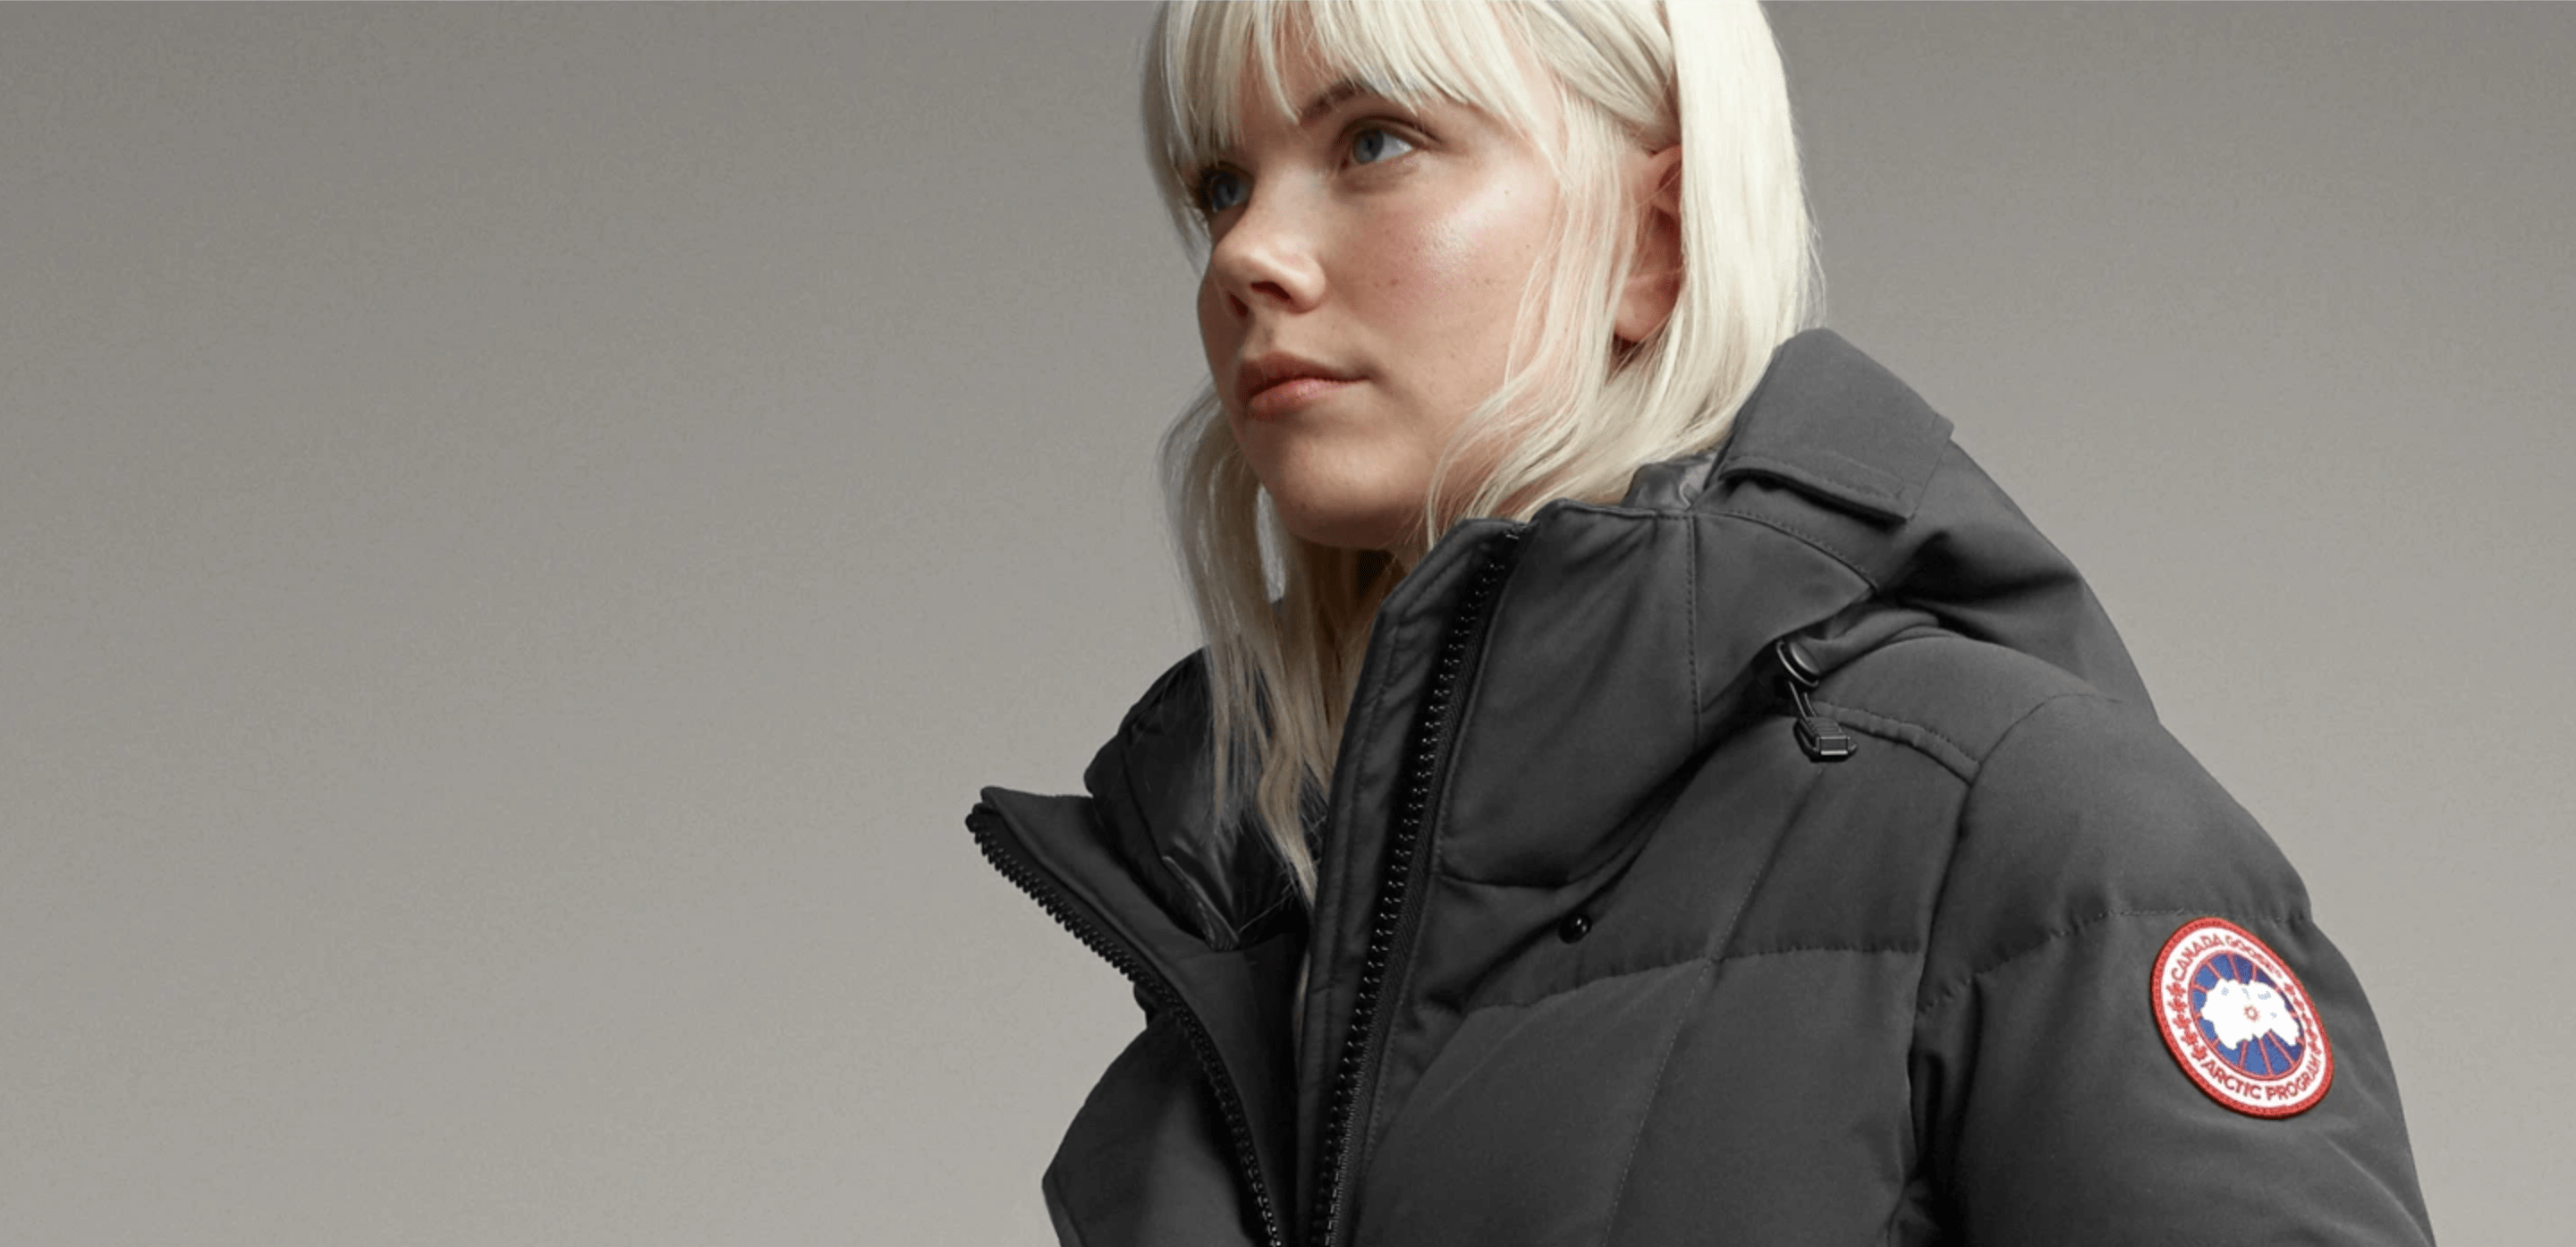 Why Canada Goose Jackets Are So Expensive | Reader's Digest